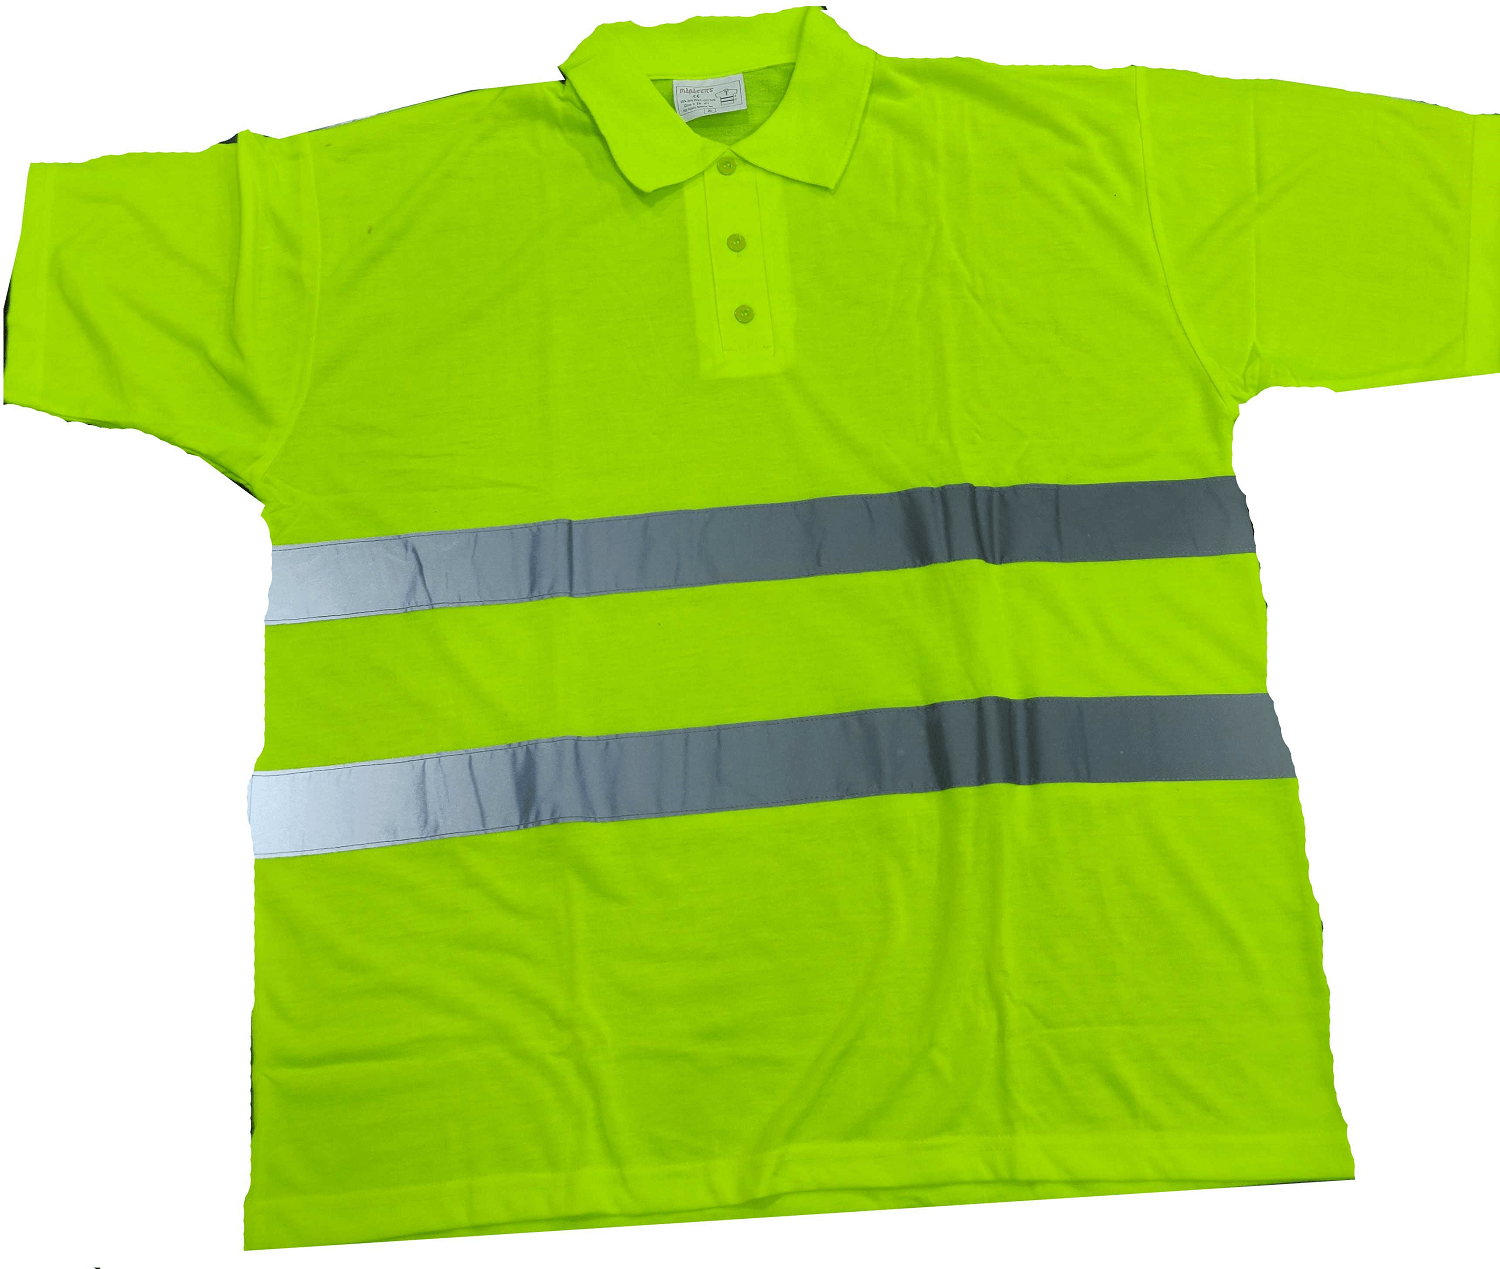  7313 Reflective T-Shirt Yellow Reflective Tape- Safety Breathable Safety Working Shirt